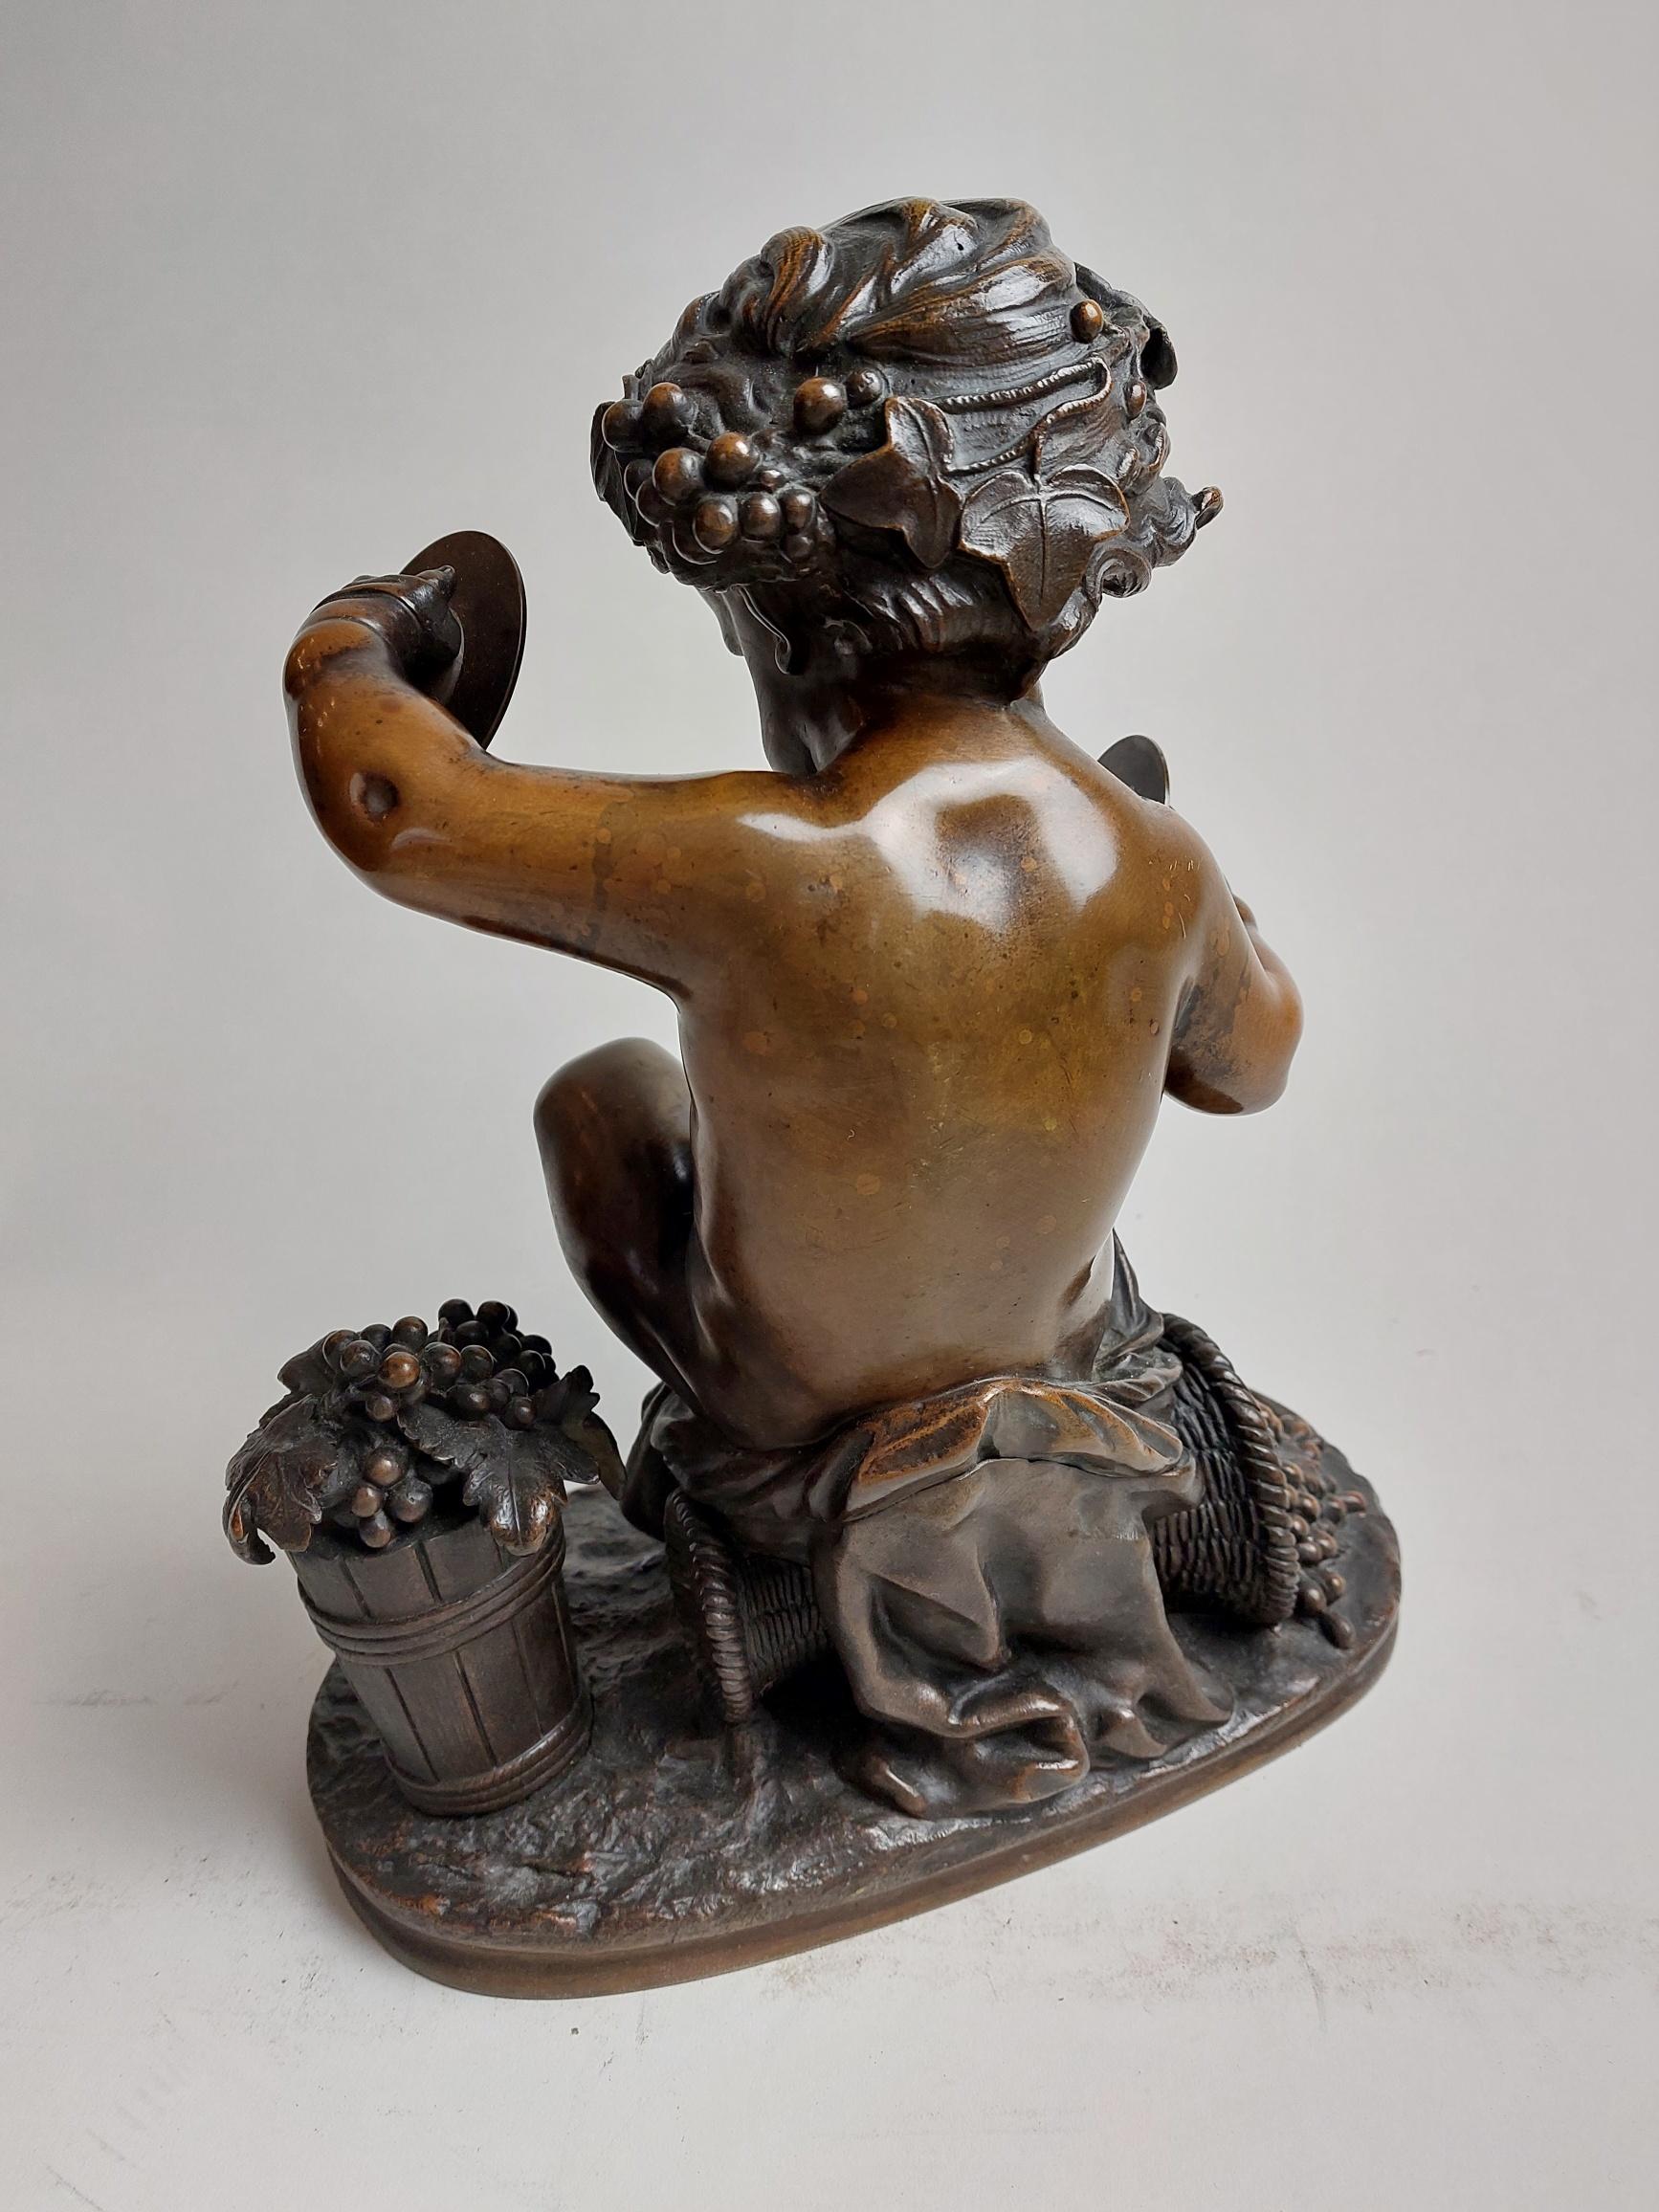 Regency Revival Sweet 19th Century Bronze of a Seated Cherub 'Putto' For Sale